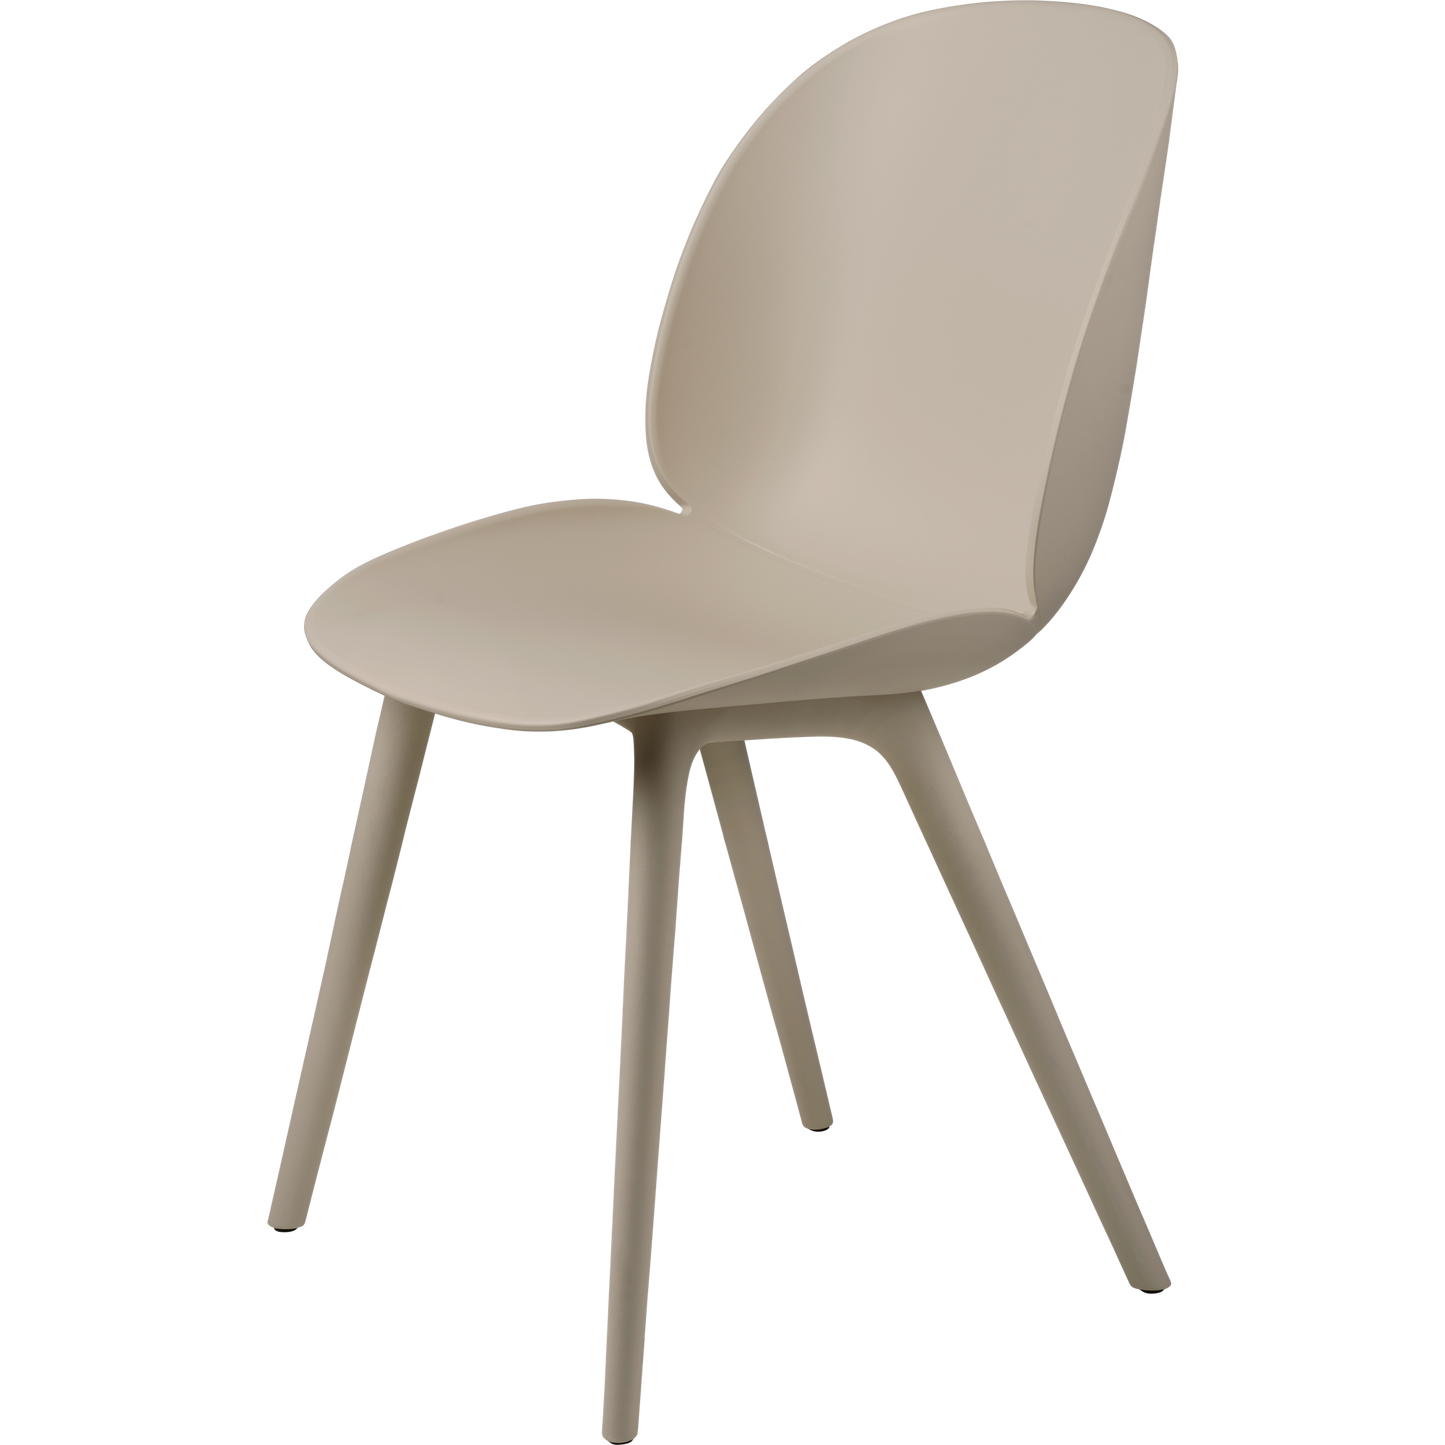 Beetle Outdoor Dining Chair Plastic by GUBI #Beige